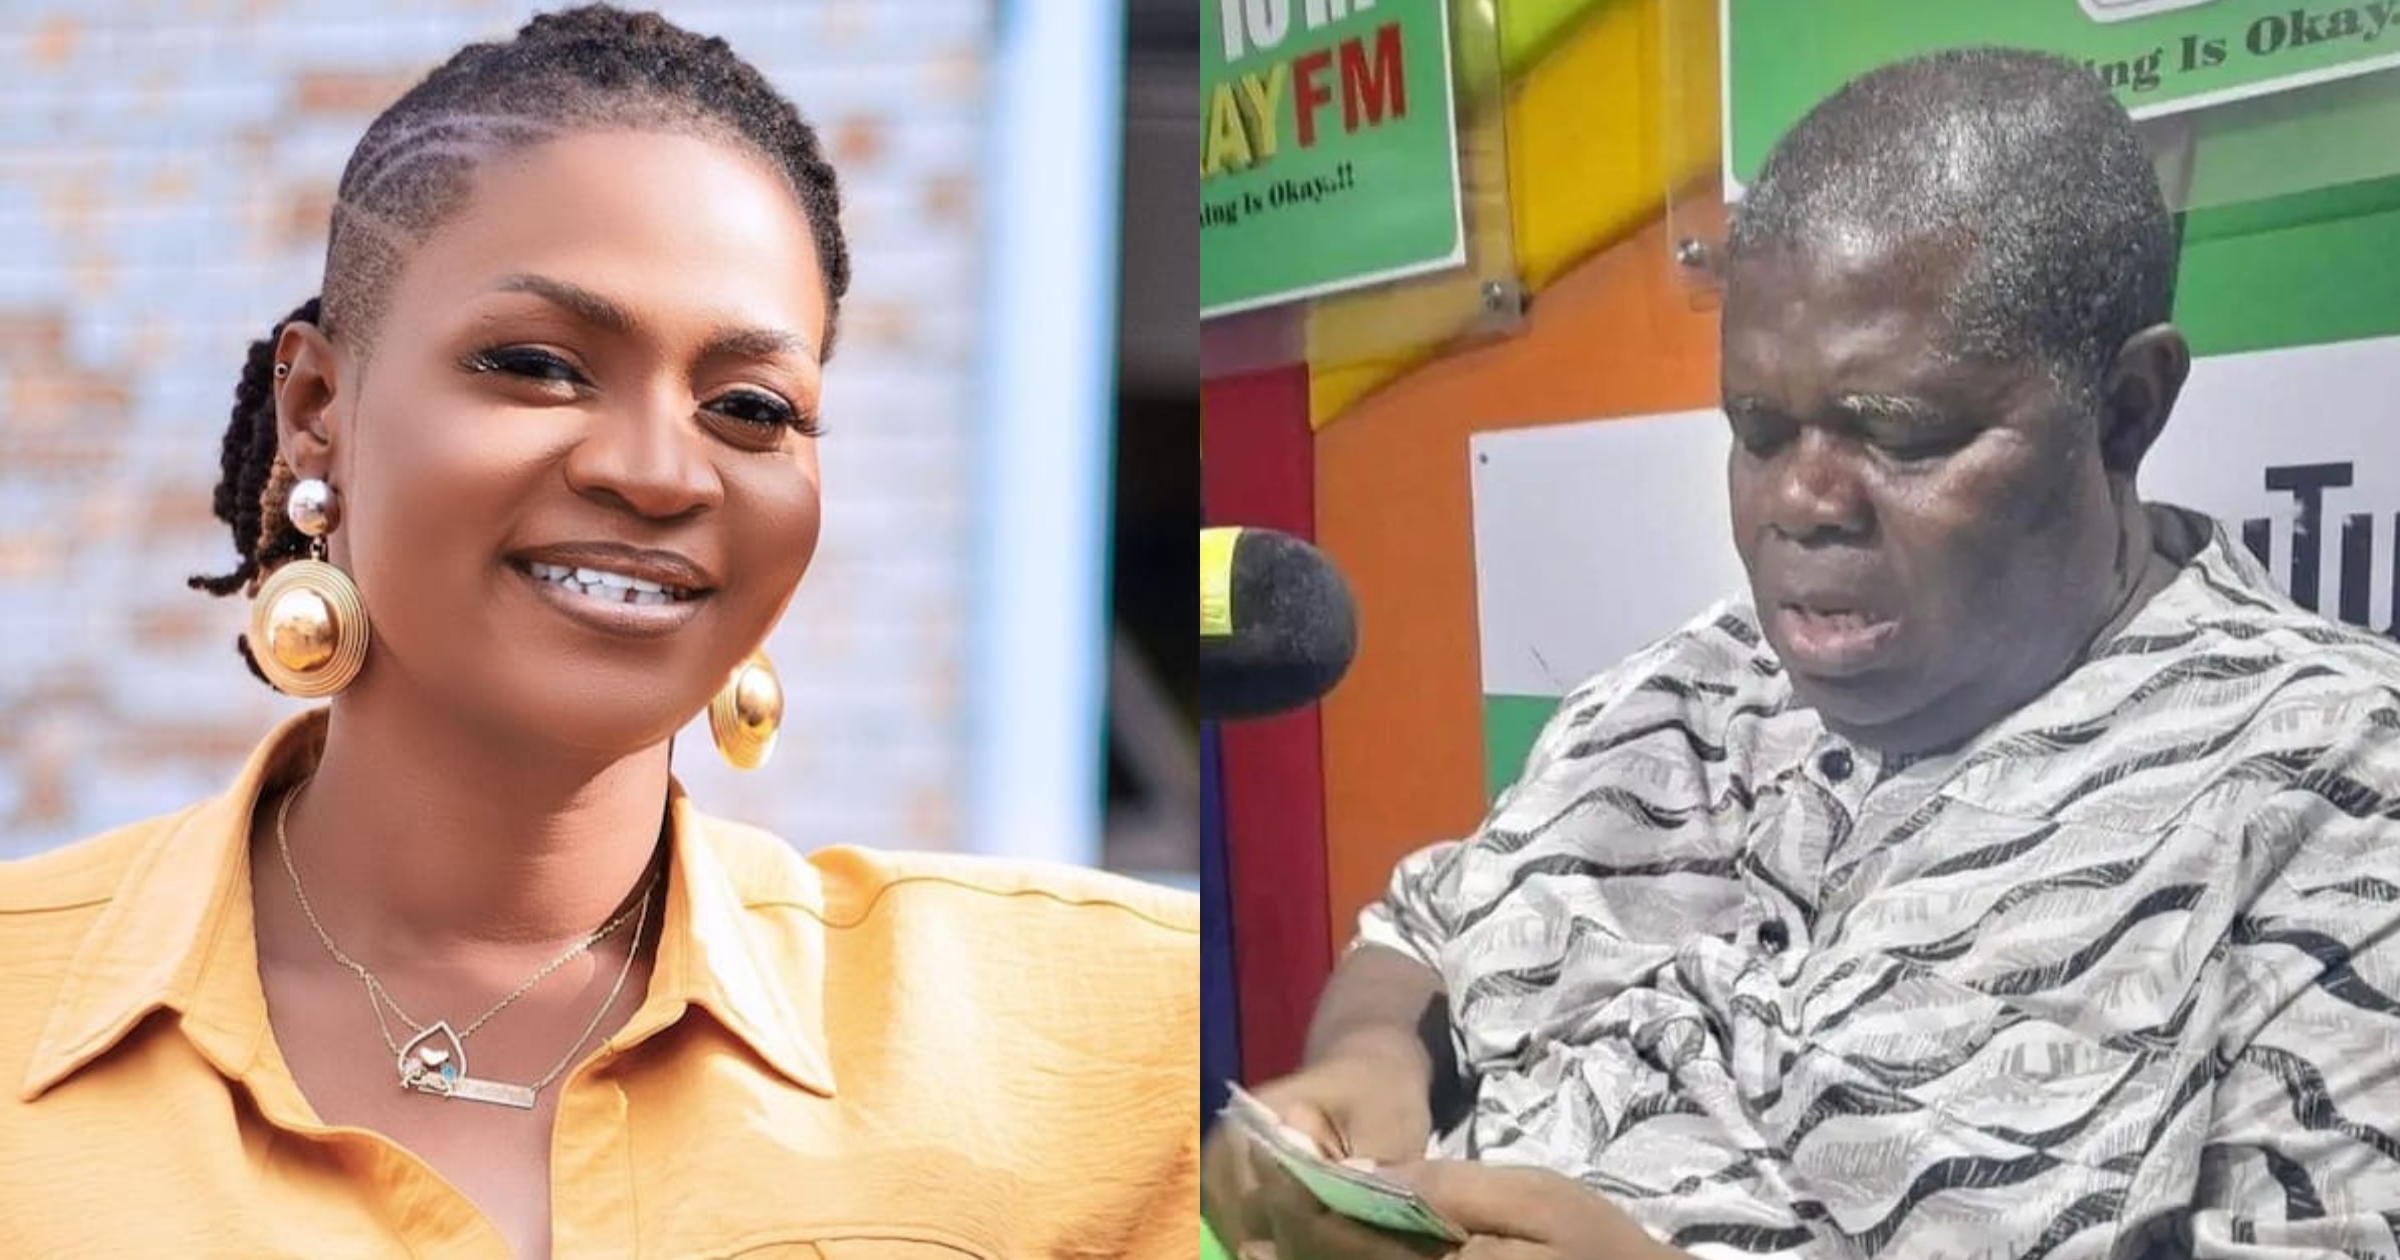 Ayisha Modi gave me GHC5,000 - TT finally confesses in video, begs for forgiveness